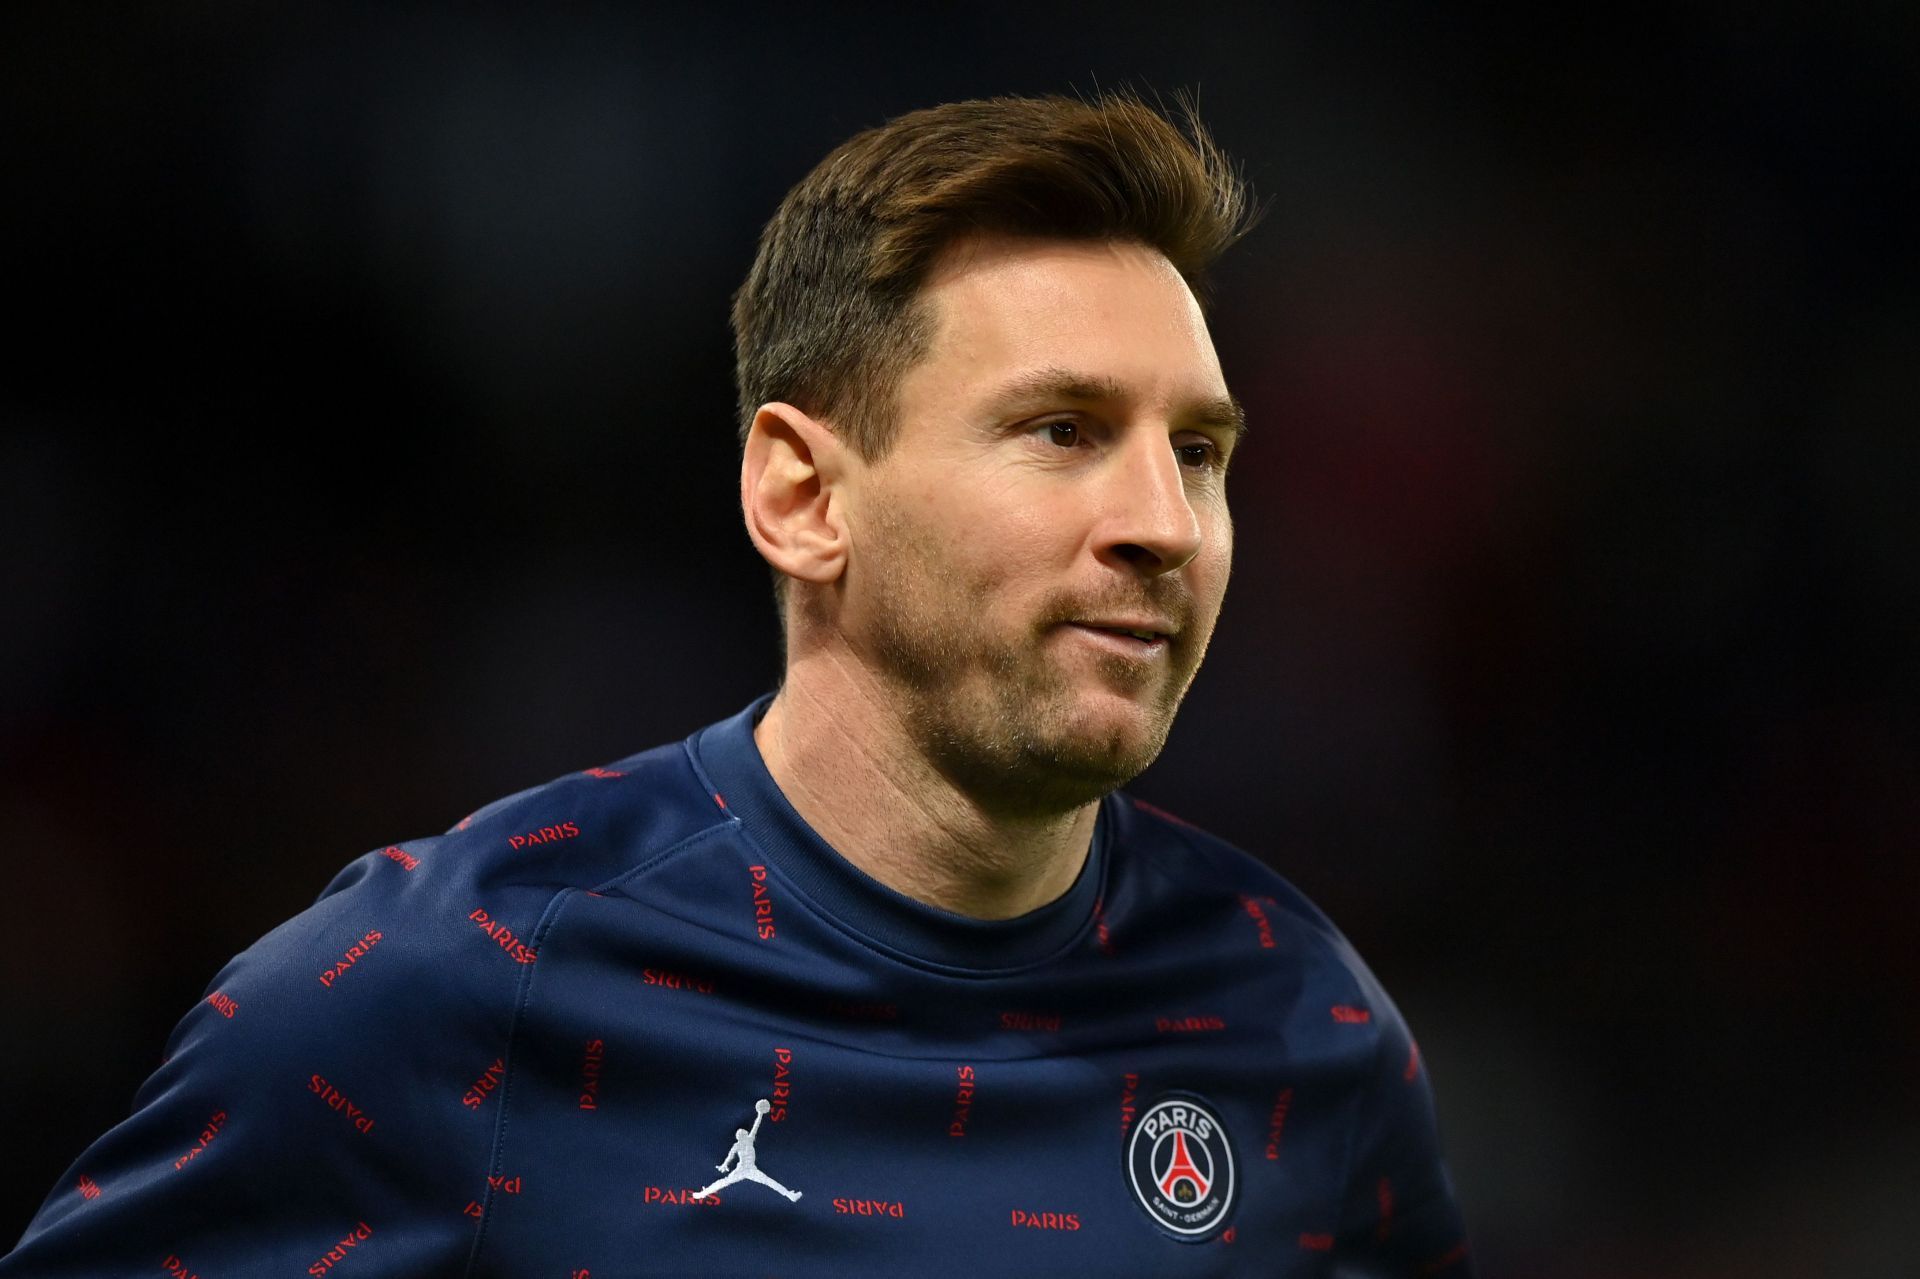 Messi is yet to score his first goal in Ligue 1